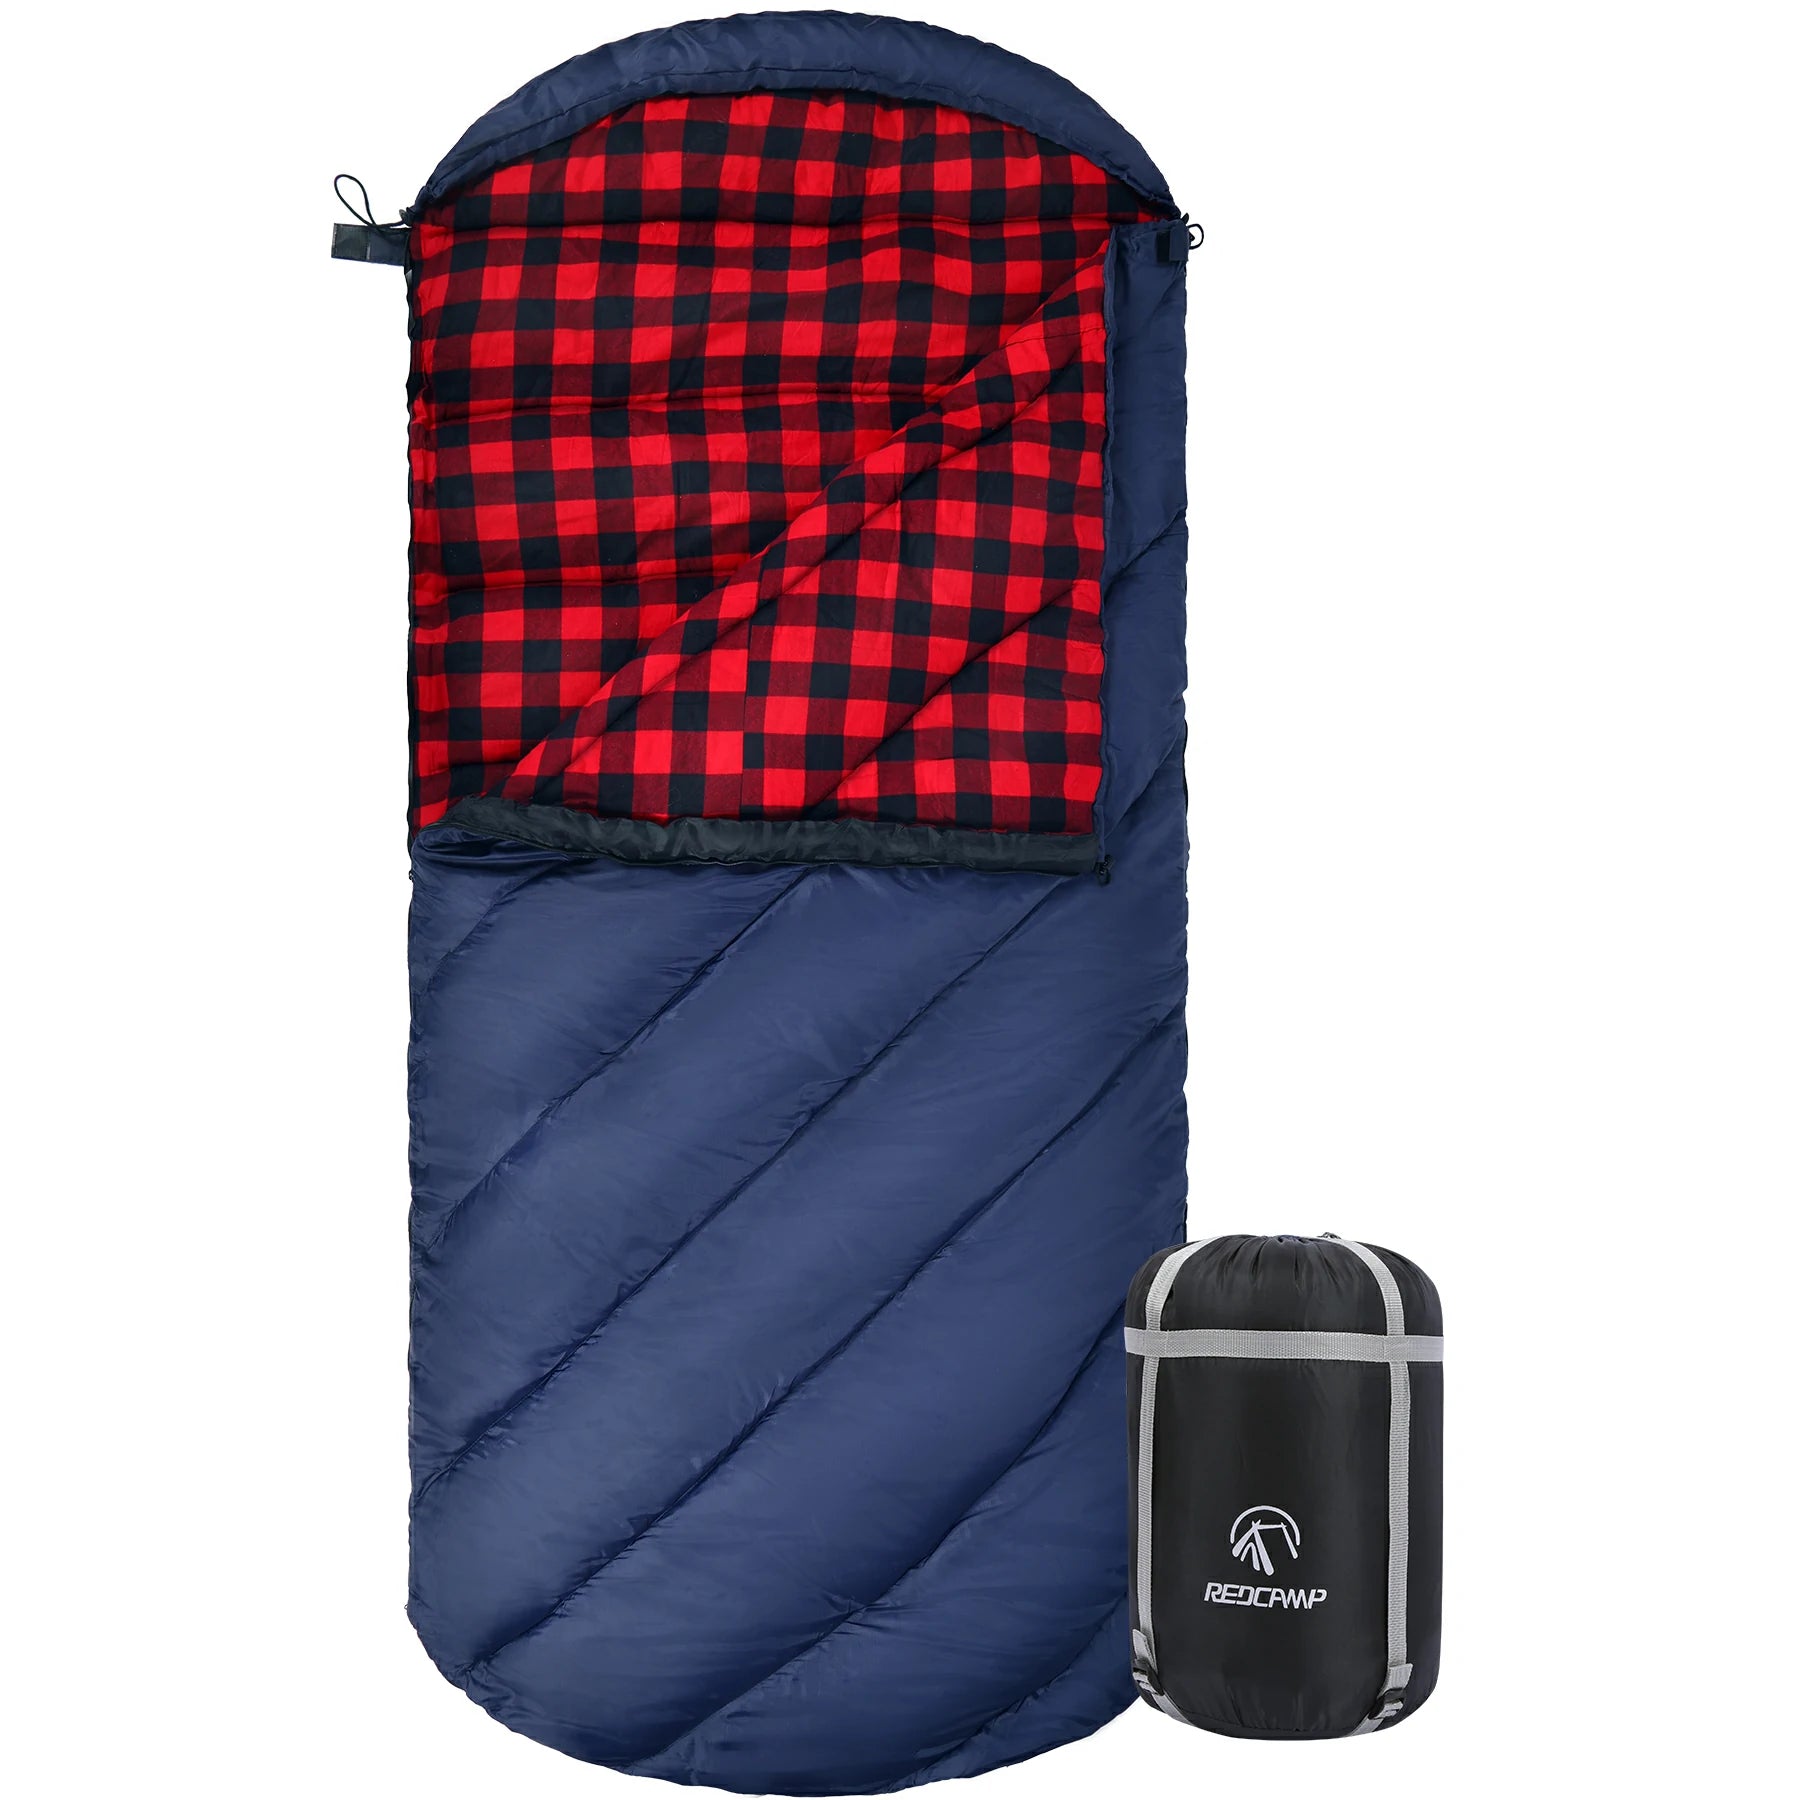 Hooded Camping Sleeping Bag for Adult with Cotton Flannel,Red,Blue,Navy Blue